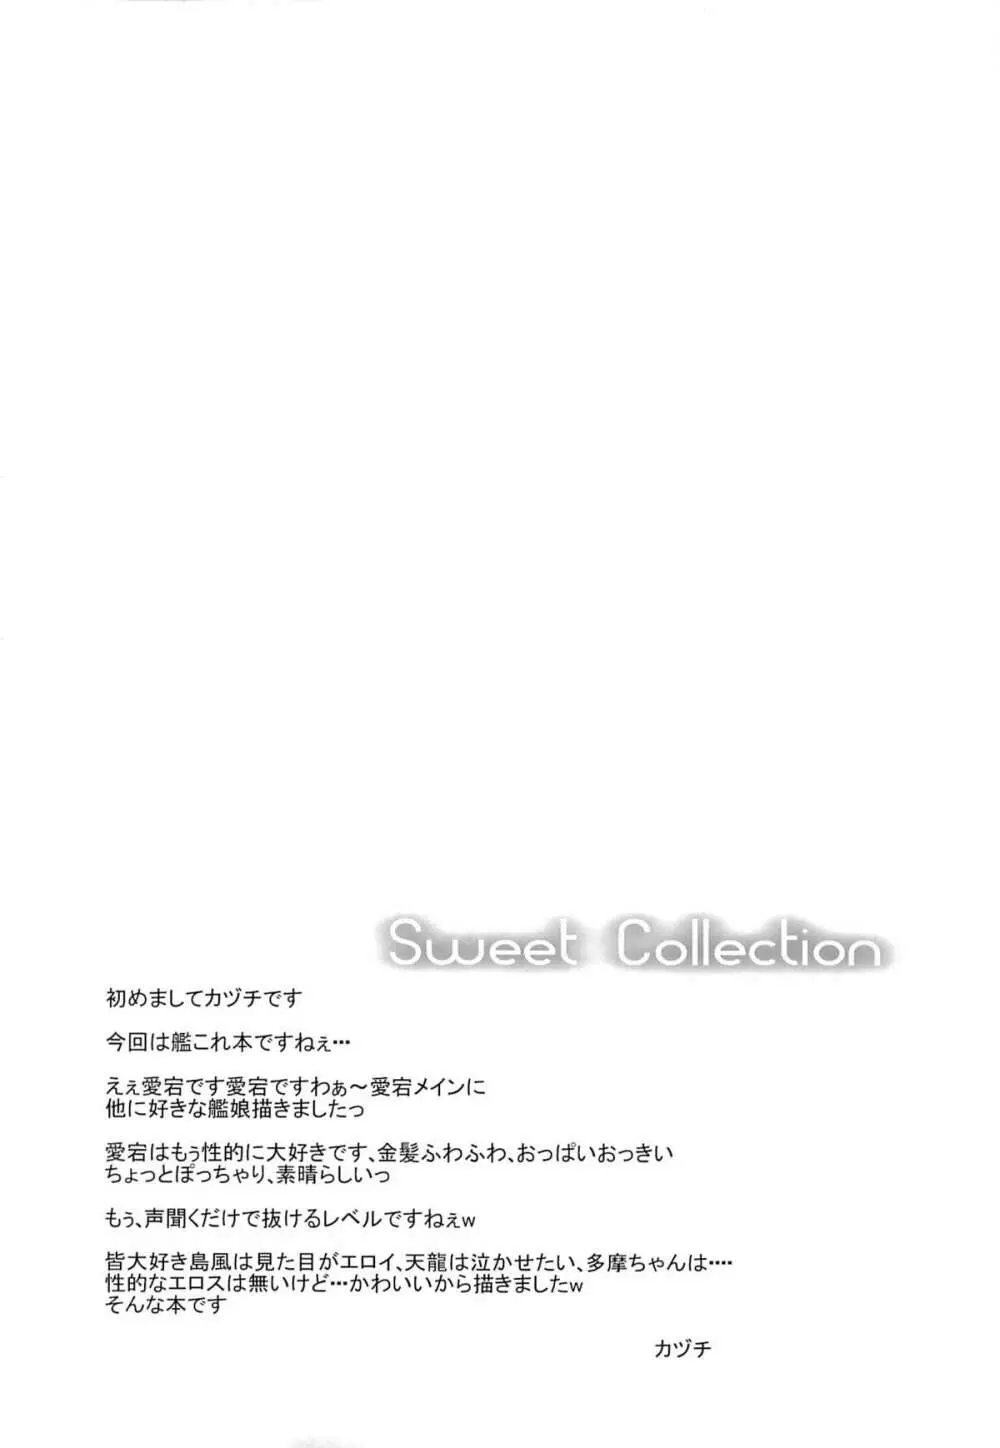 Sweet Collection 3ページ